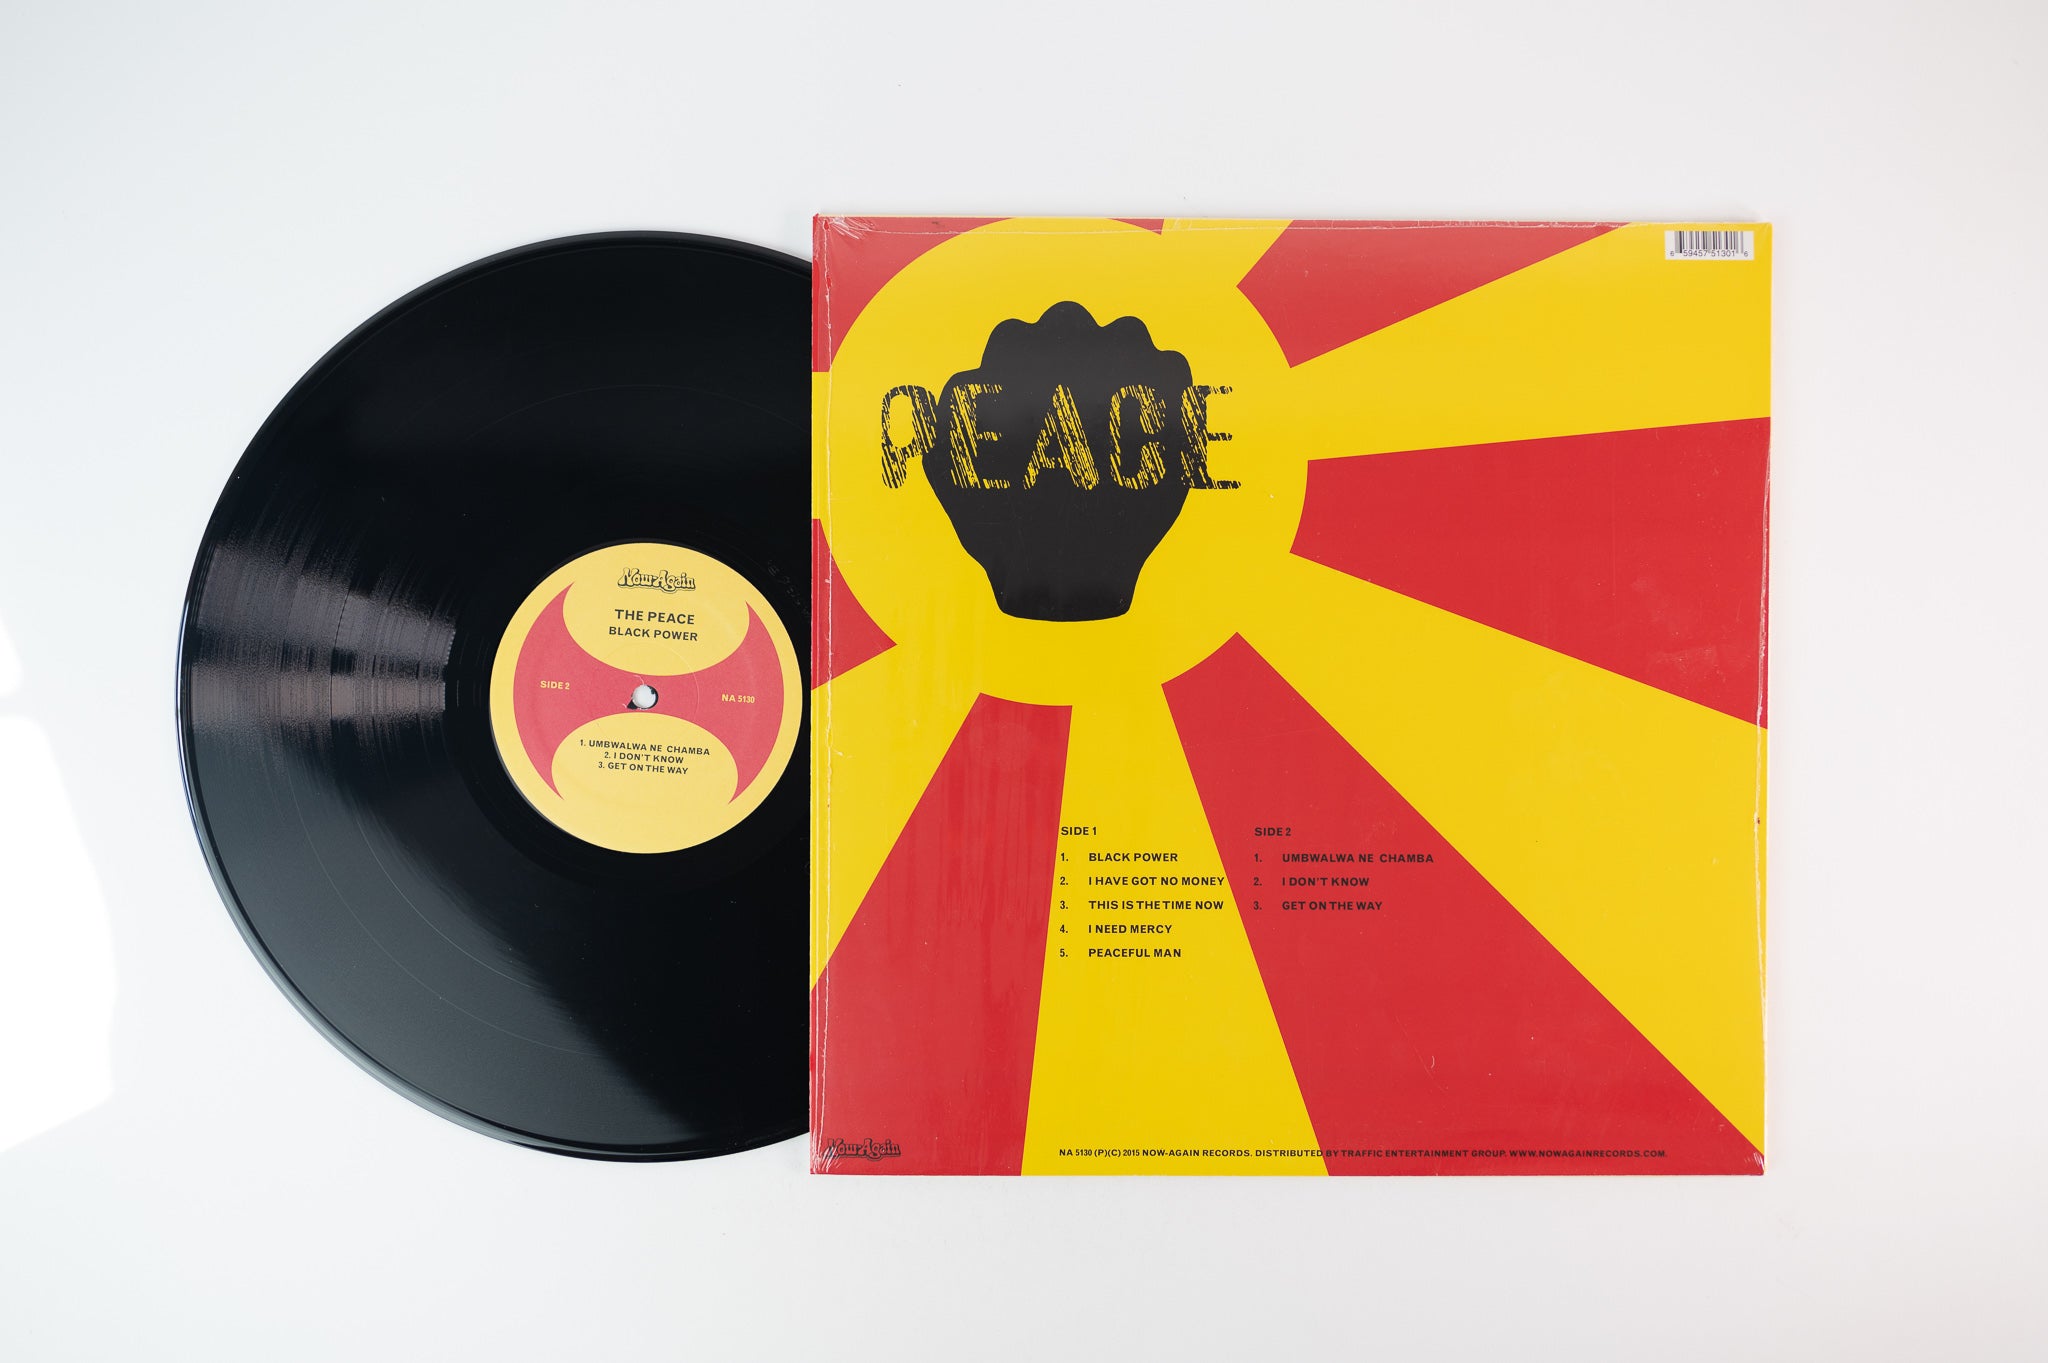 The Peace - Black Power on Now Again Reissue